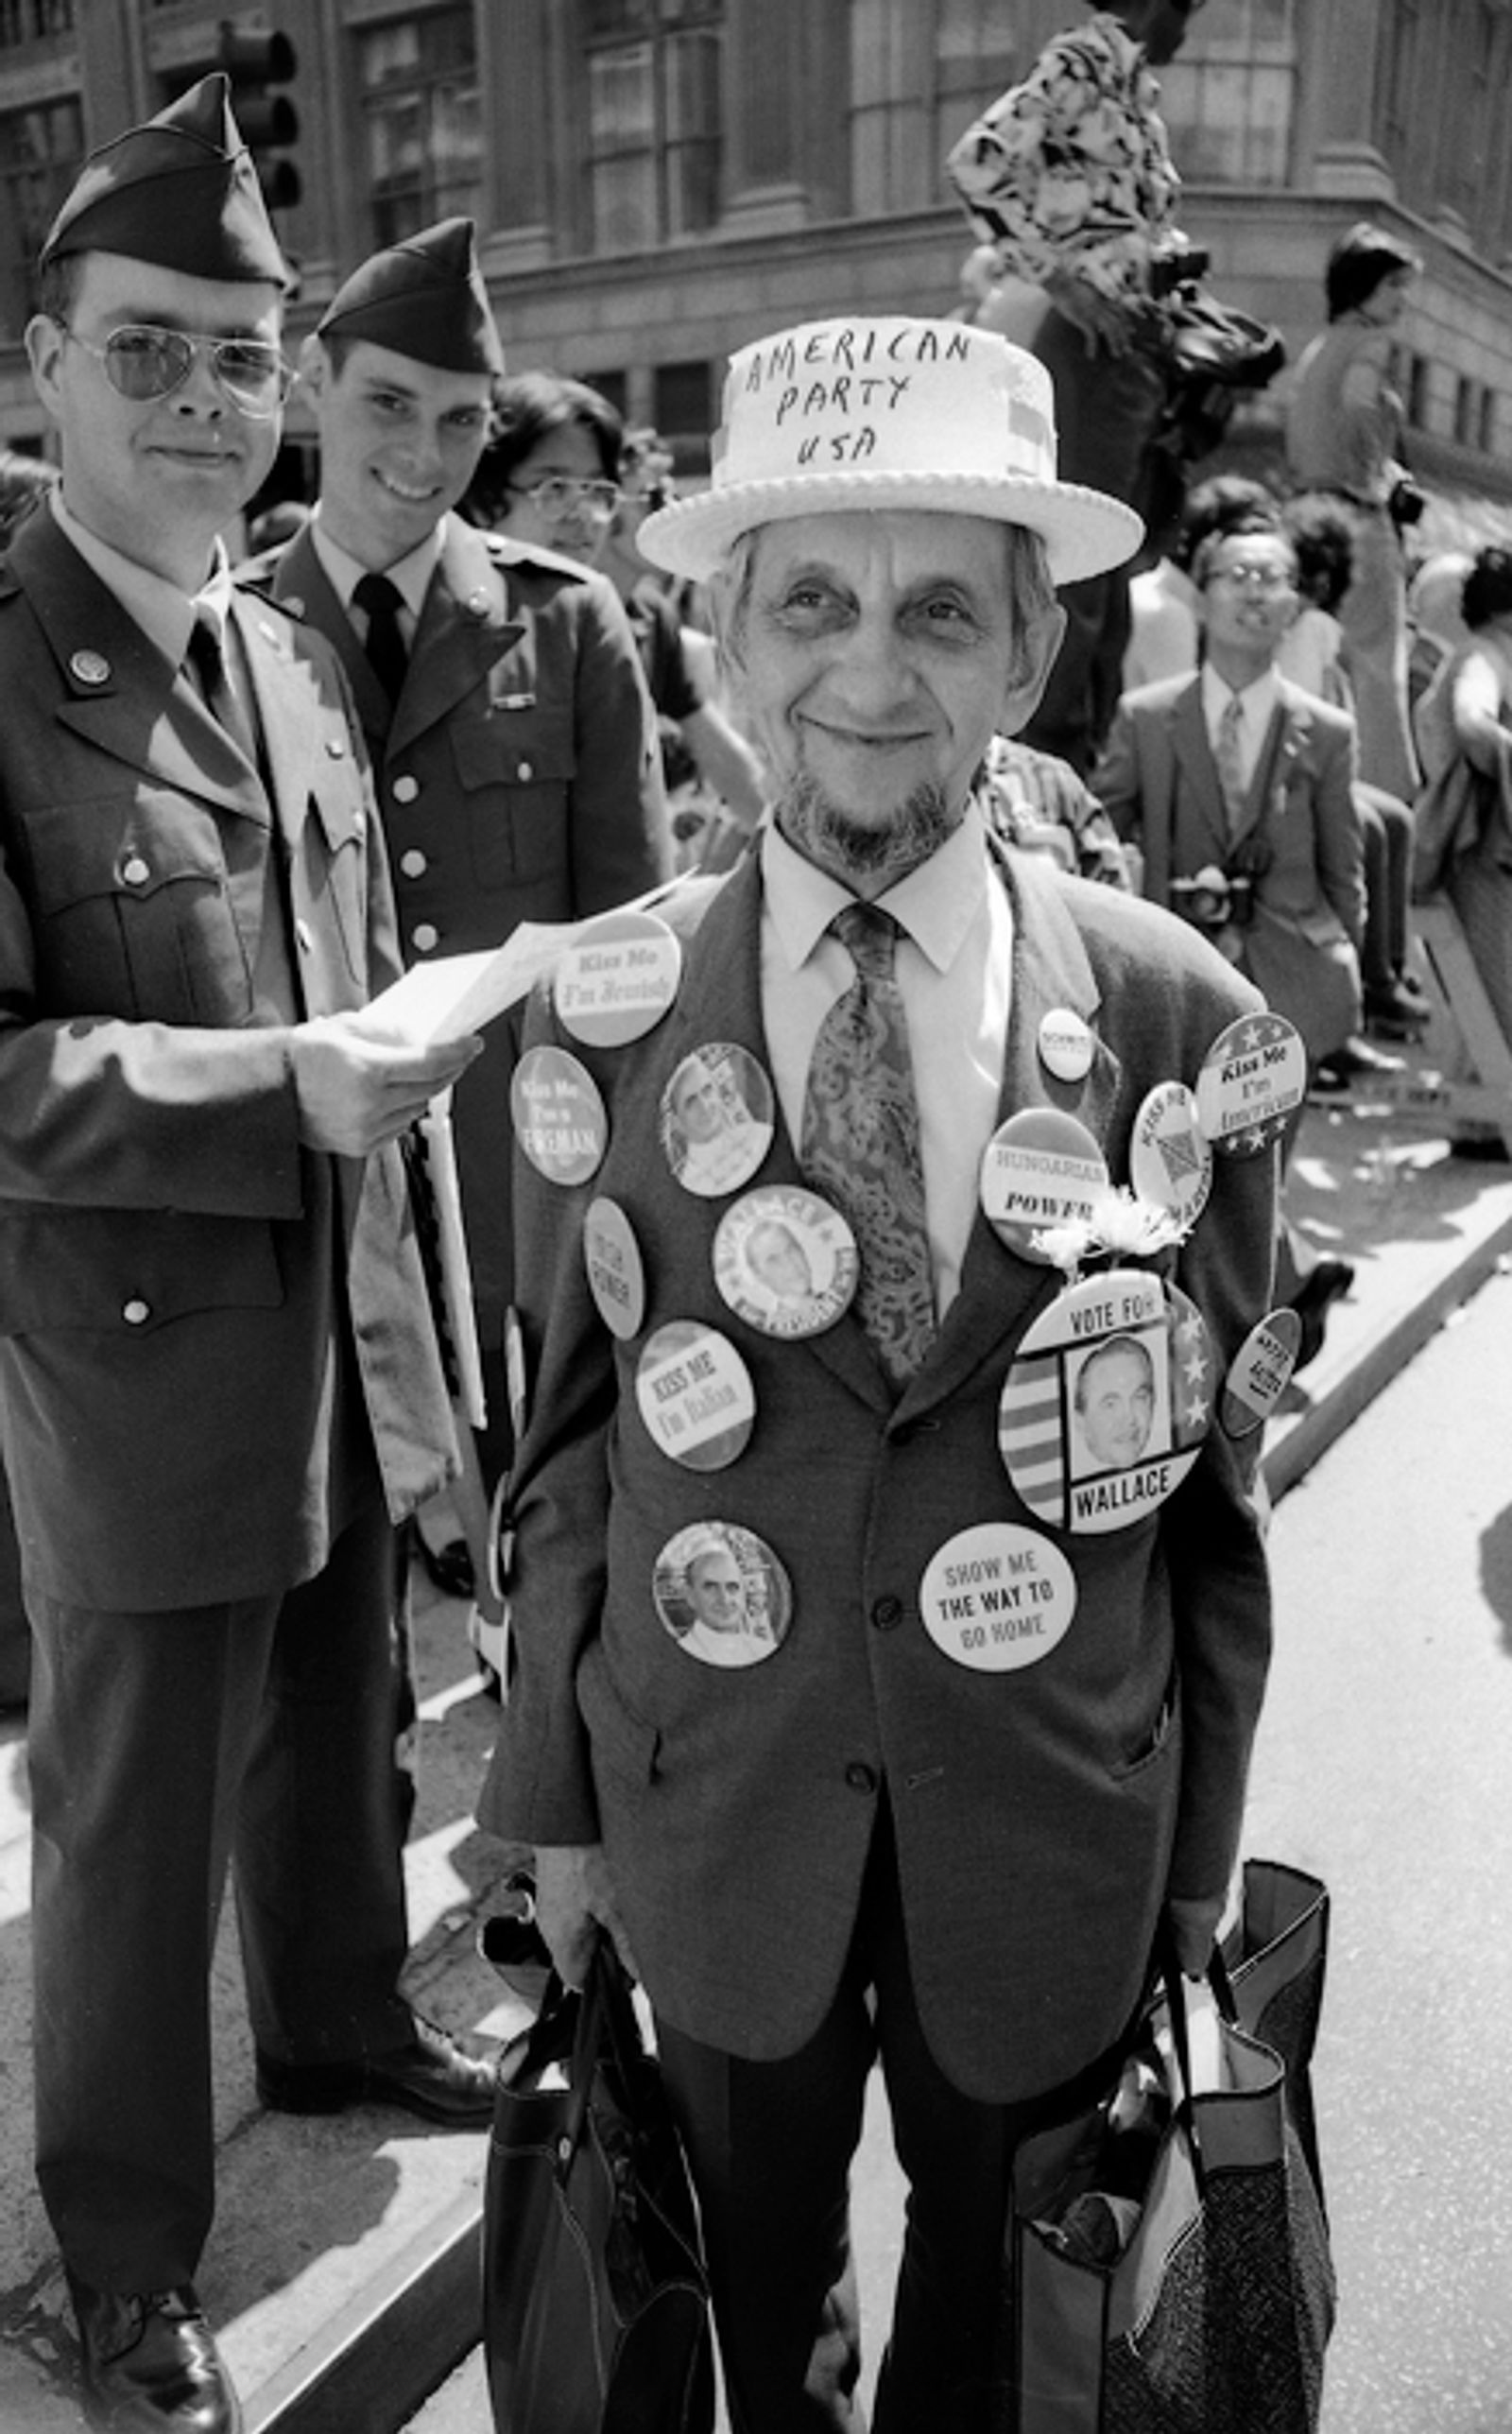 © Steven Edson - Man with political buttons. NYC, NY